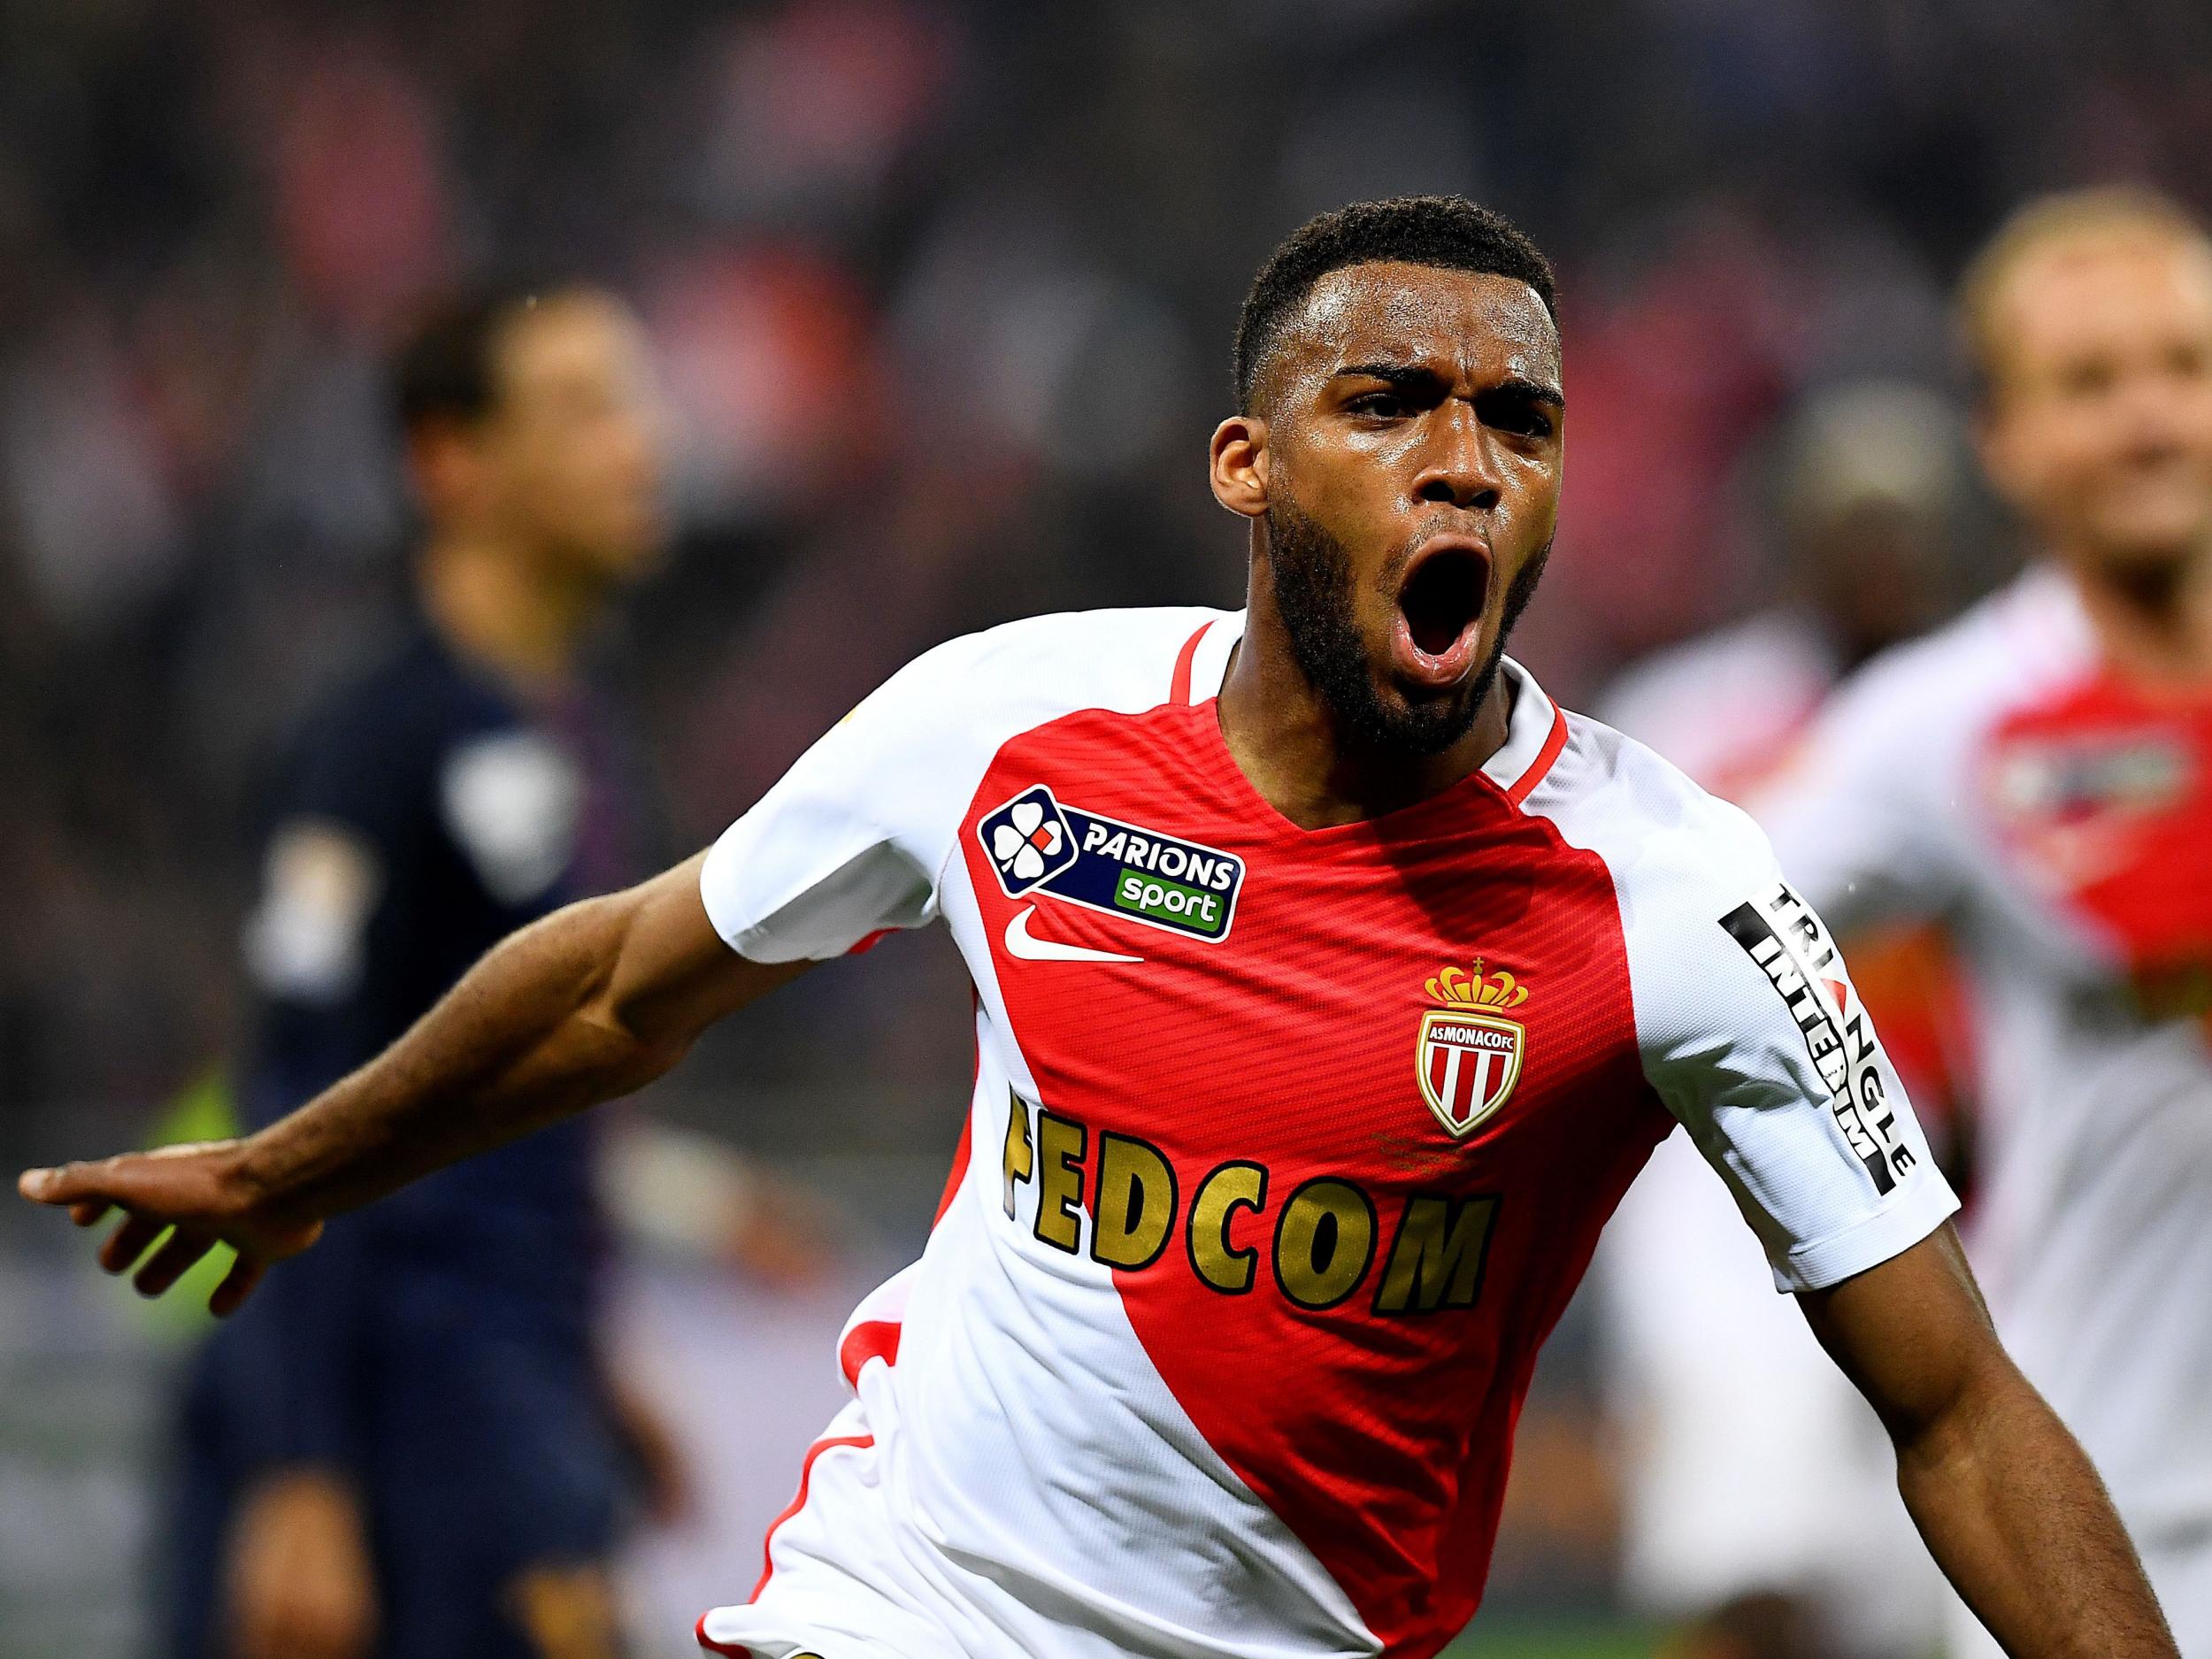 Thomas Lemar has attracted interest from both Liverpool and Arsenal in recent months